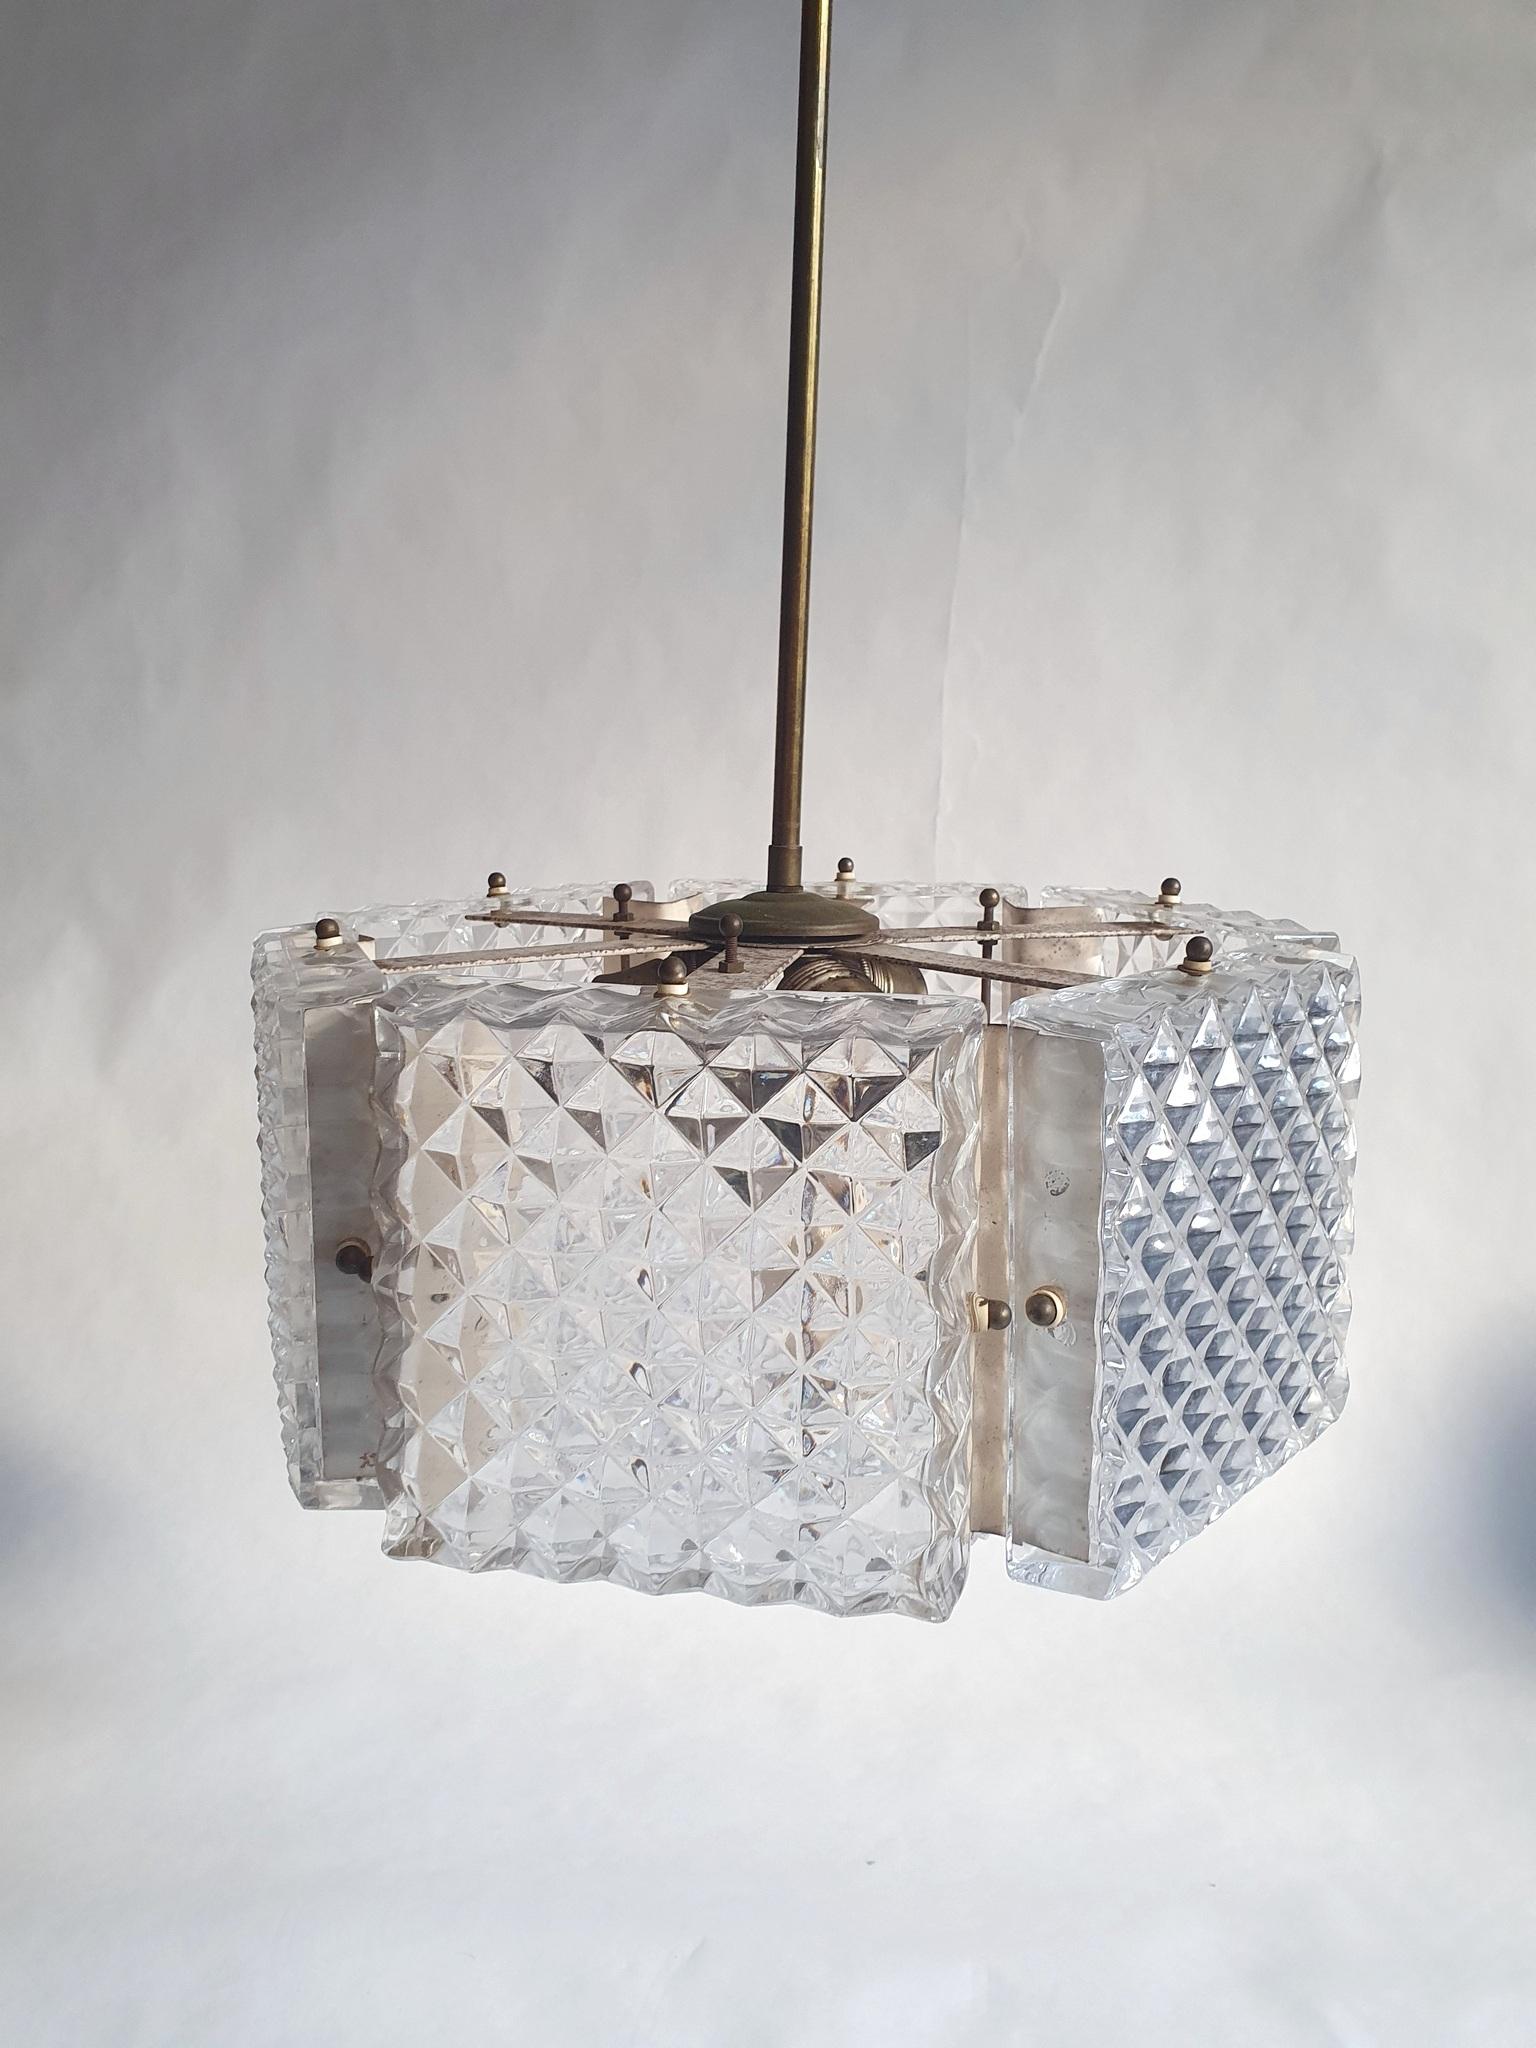 An unusial hexagon pendan in clear glass, , by the world renowned Swedish glass maker Orrefors. The chandelier has a particular design consisting of six squares set in a hexagon shape with a pattern a bit similar to Belgian waffles. The bottom of